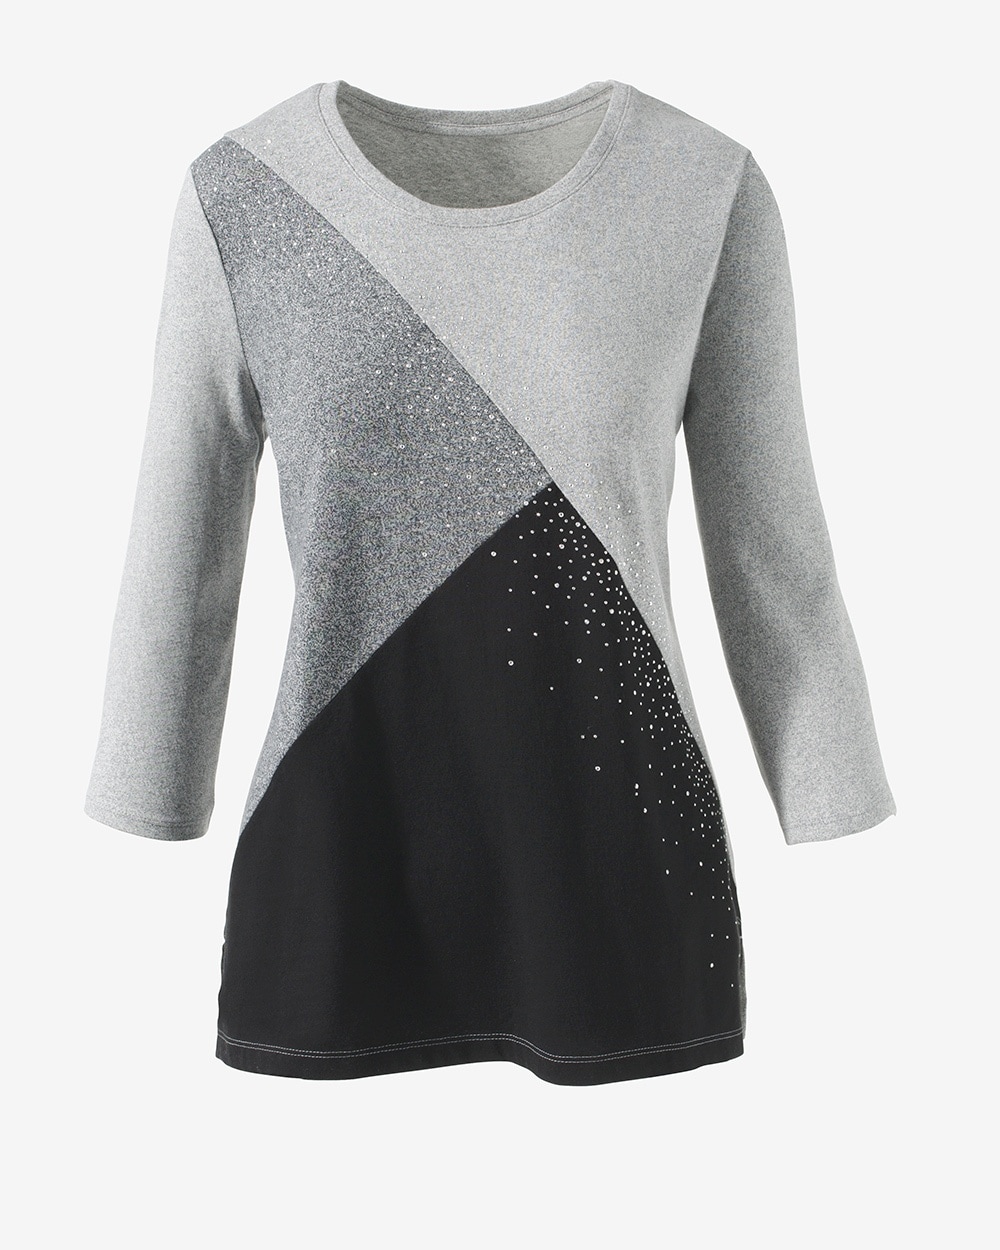 Weekends Embellished Colorblock Tunic